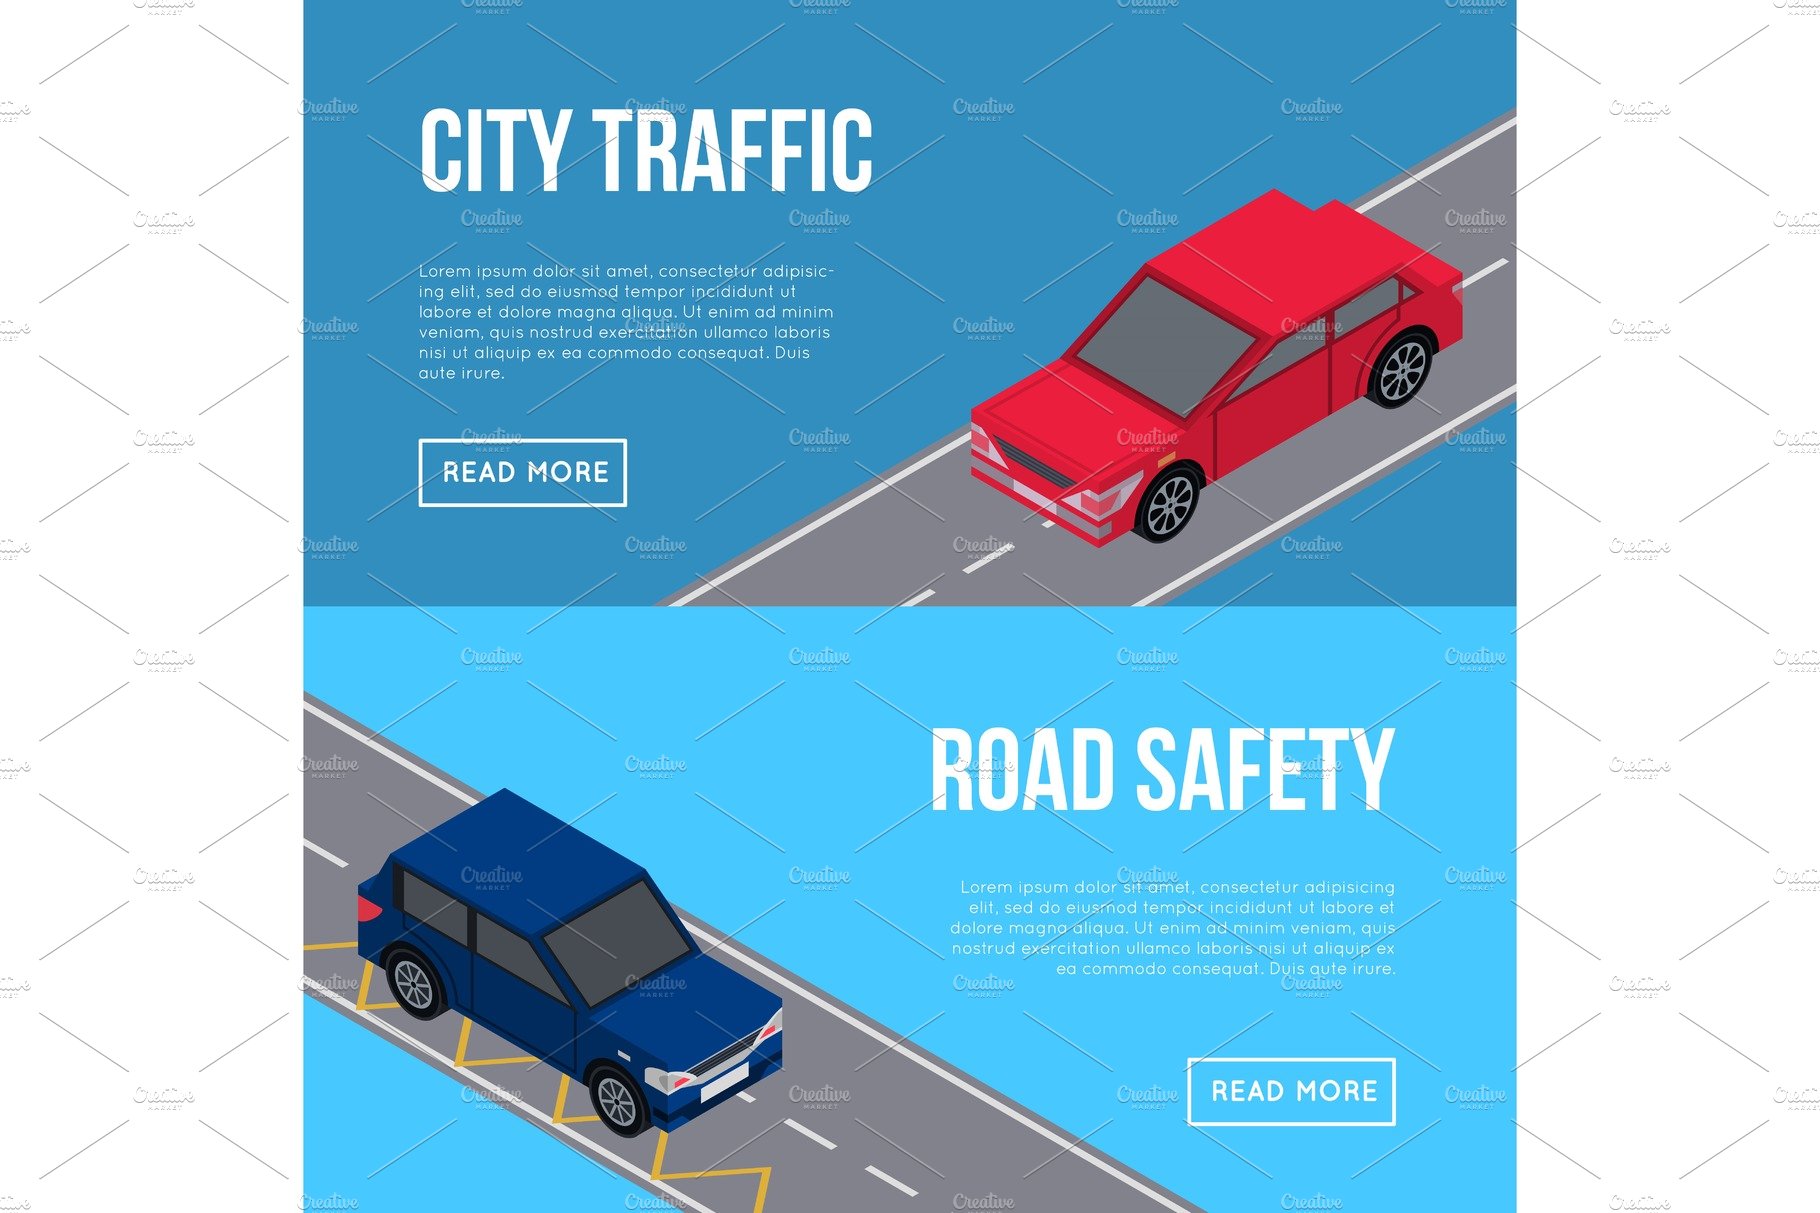 City traffic flyers with cars in road cover image.